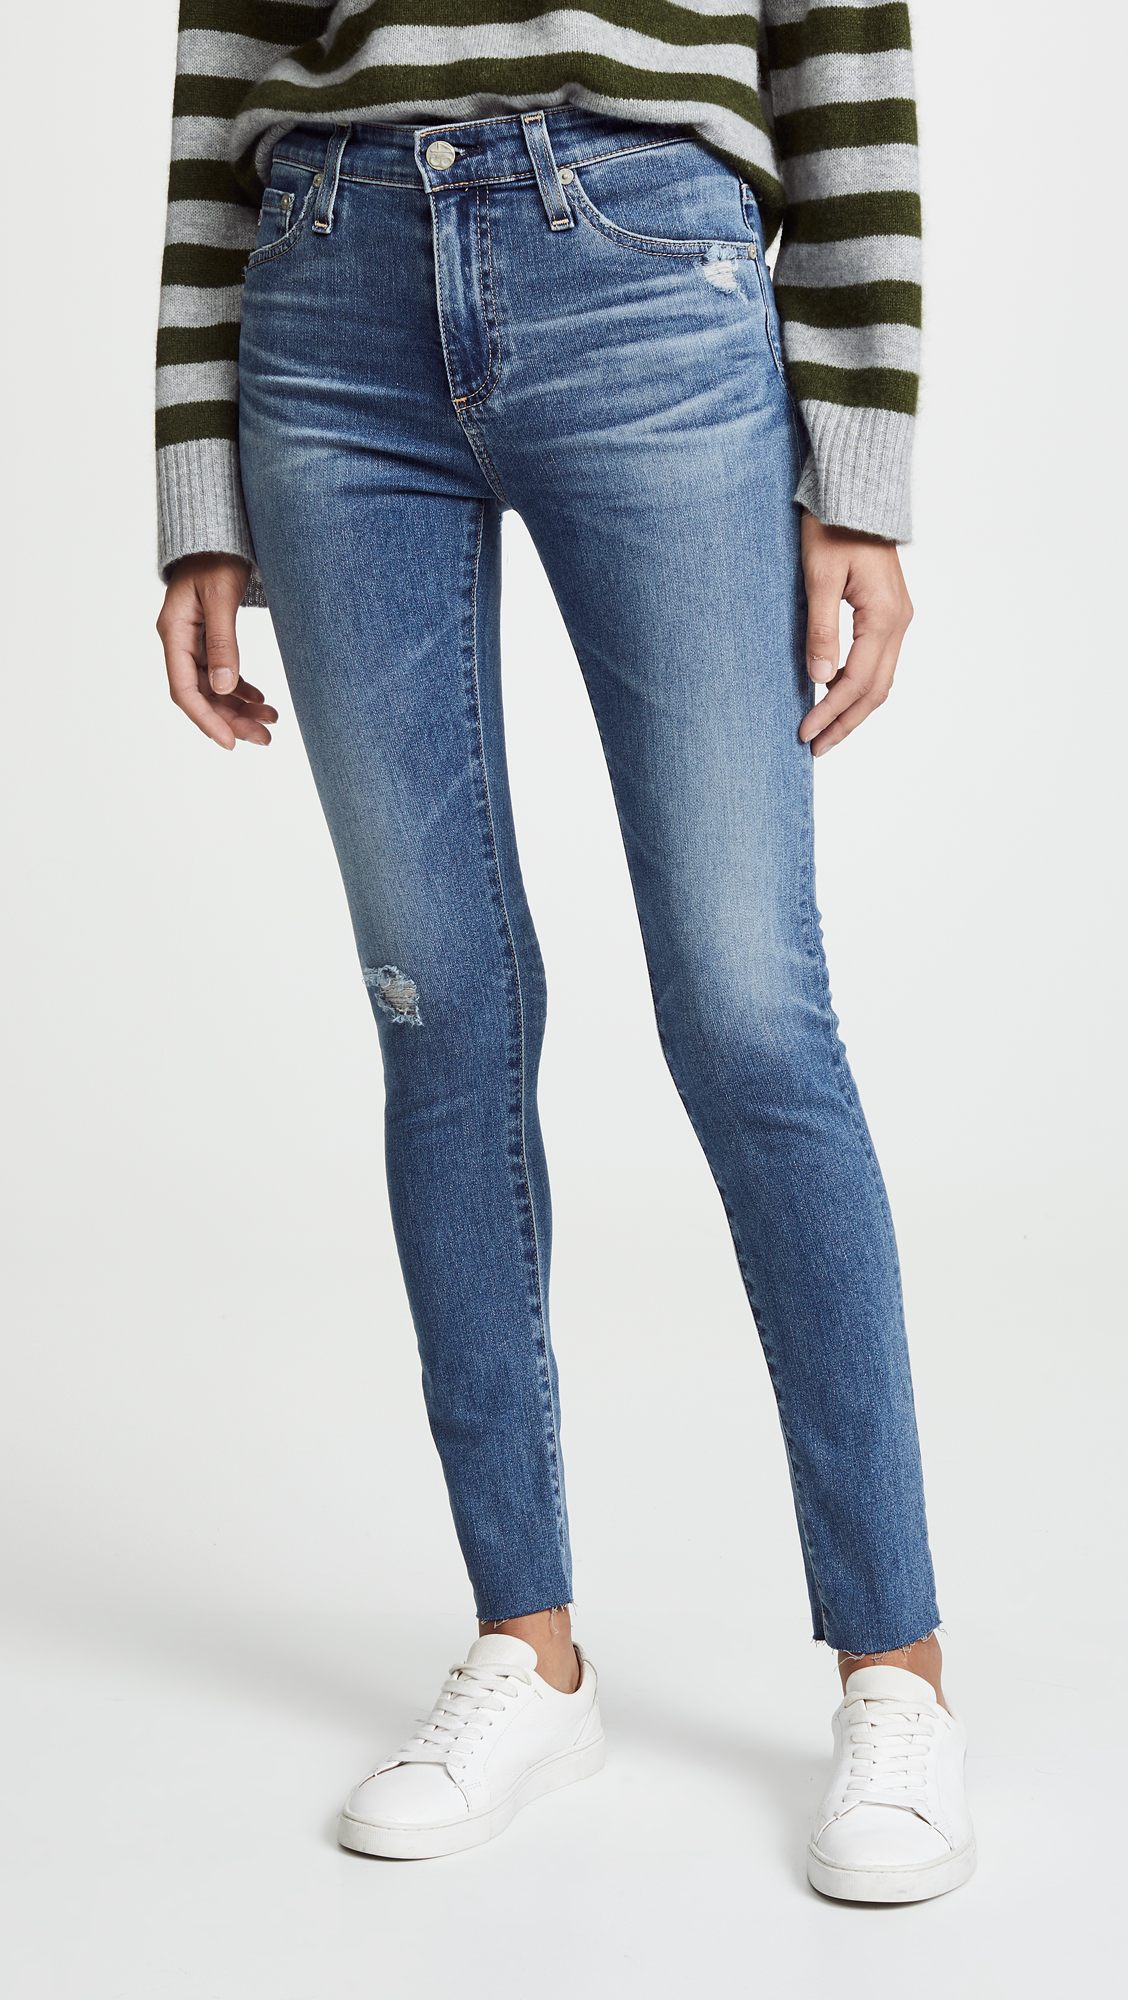 3 Skinny Jeans That Never Lose Their Popularity | Who What Wear